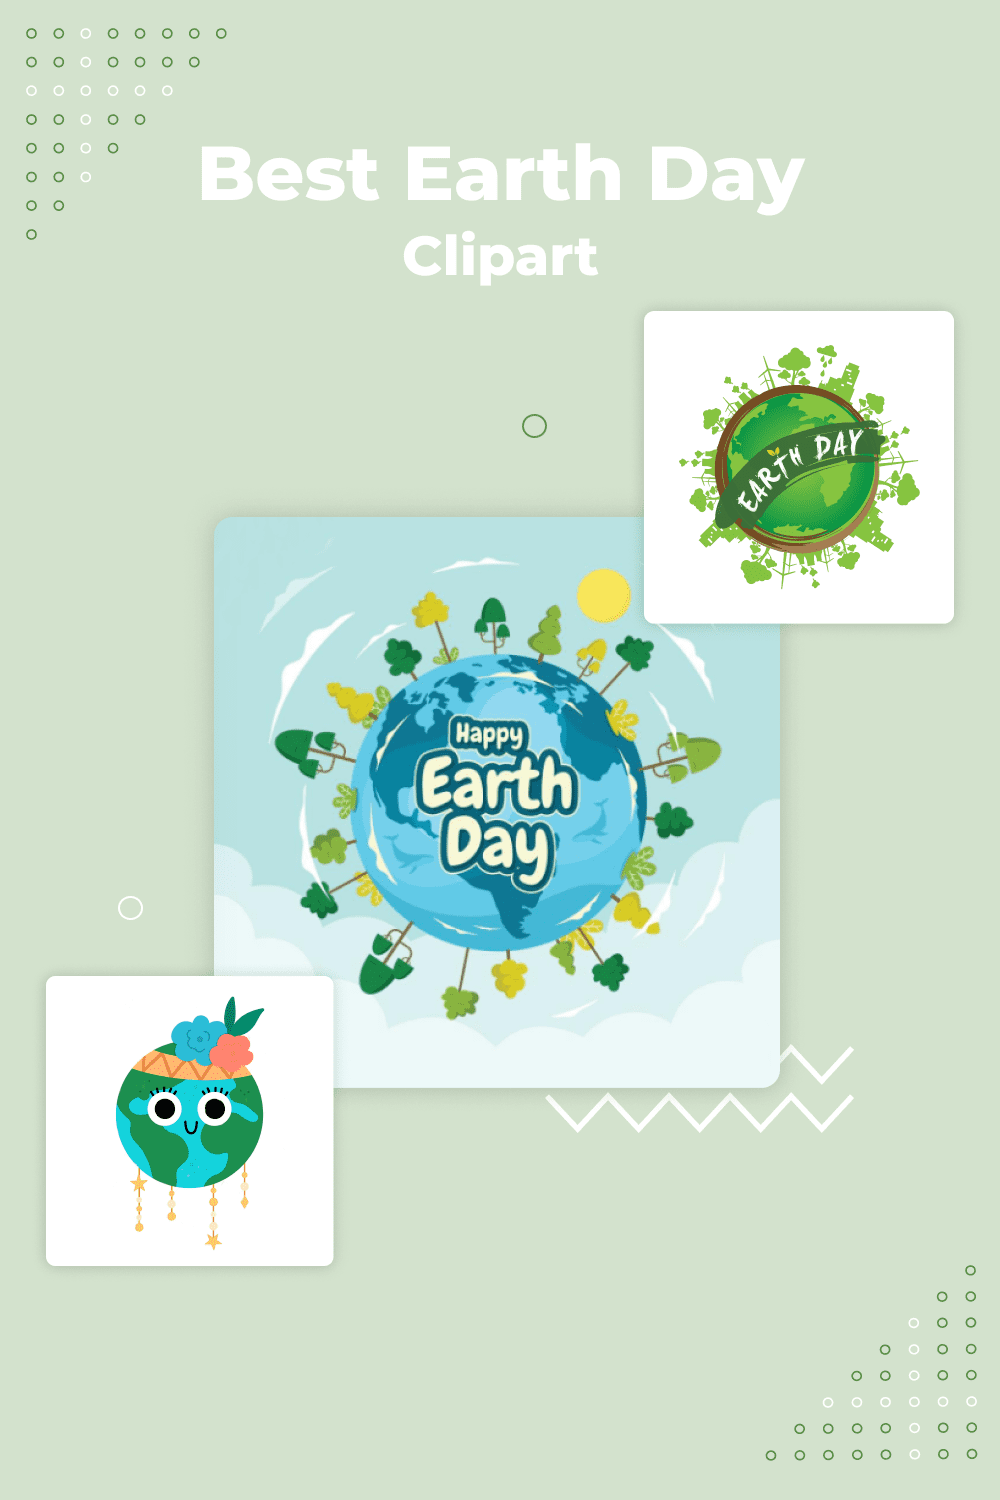 Green earth day card with a picture of a bird.